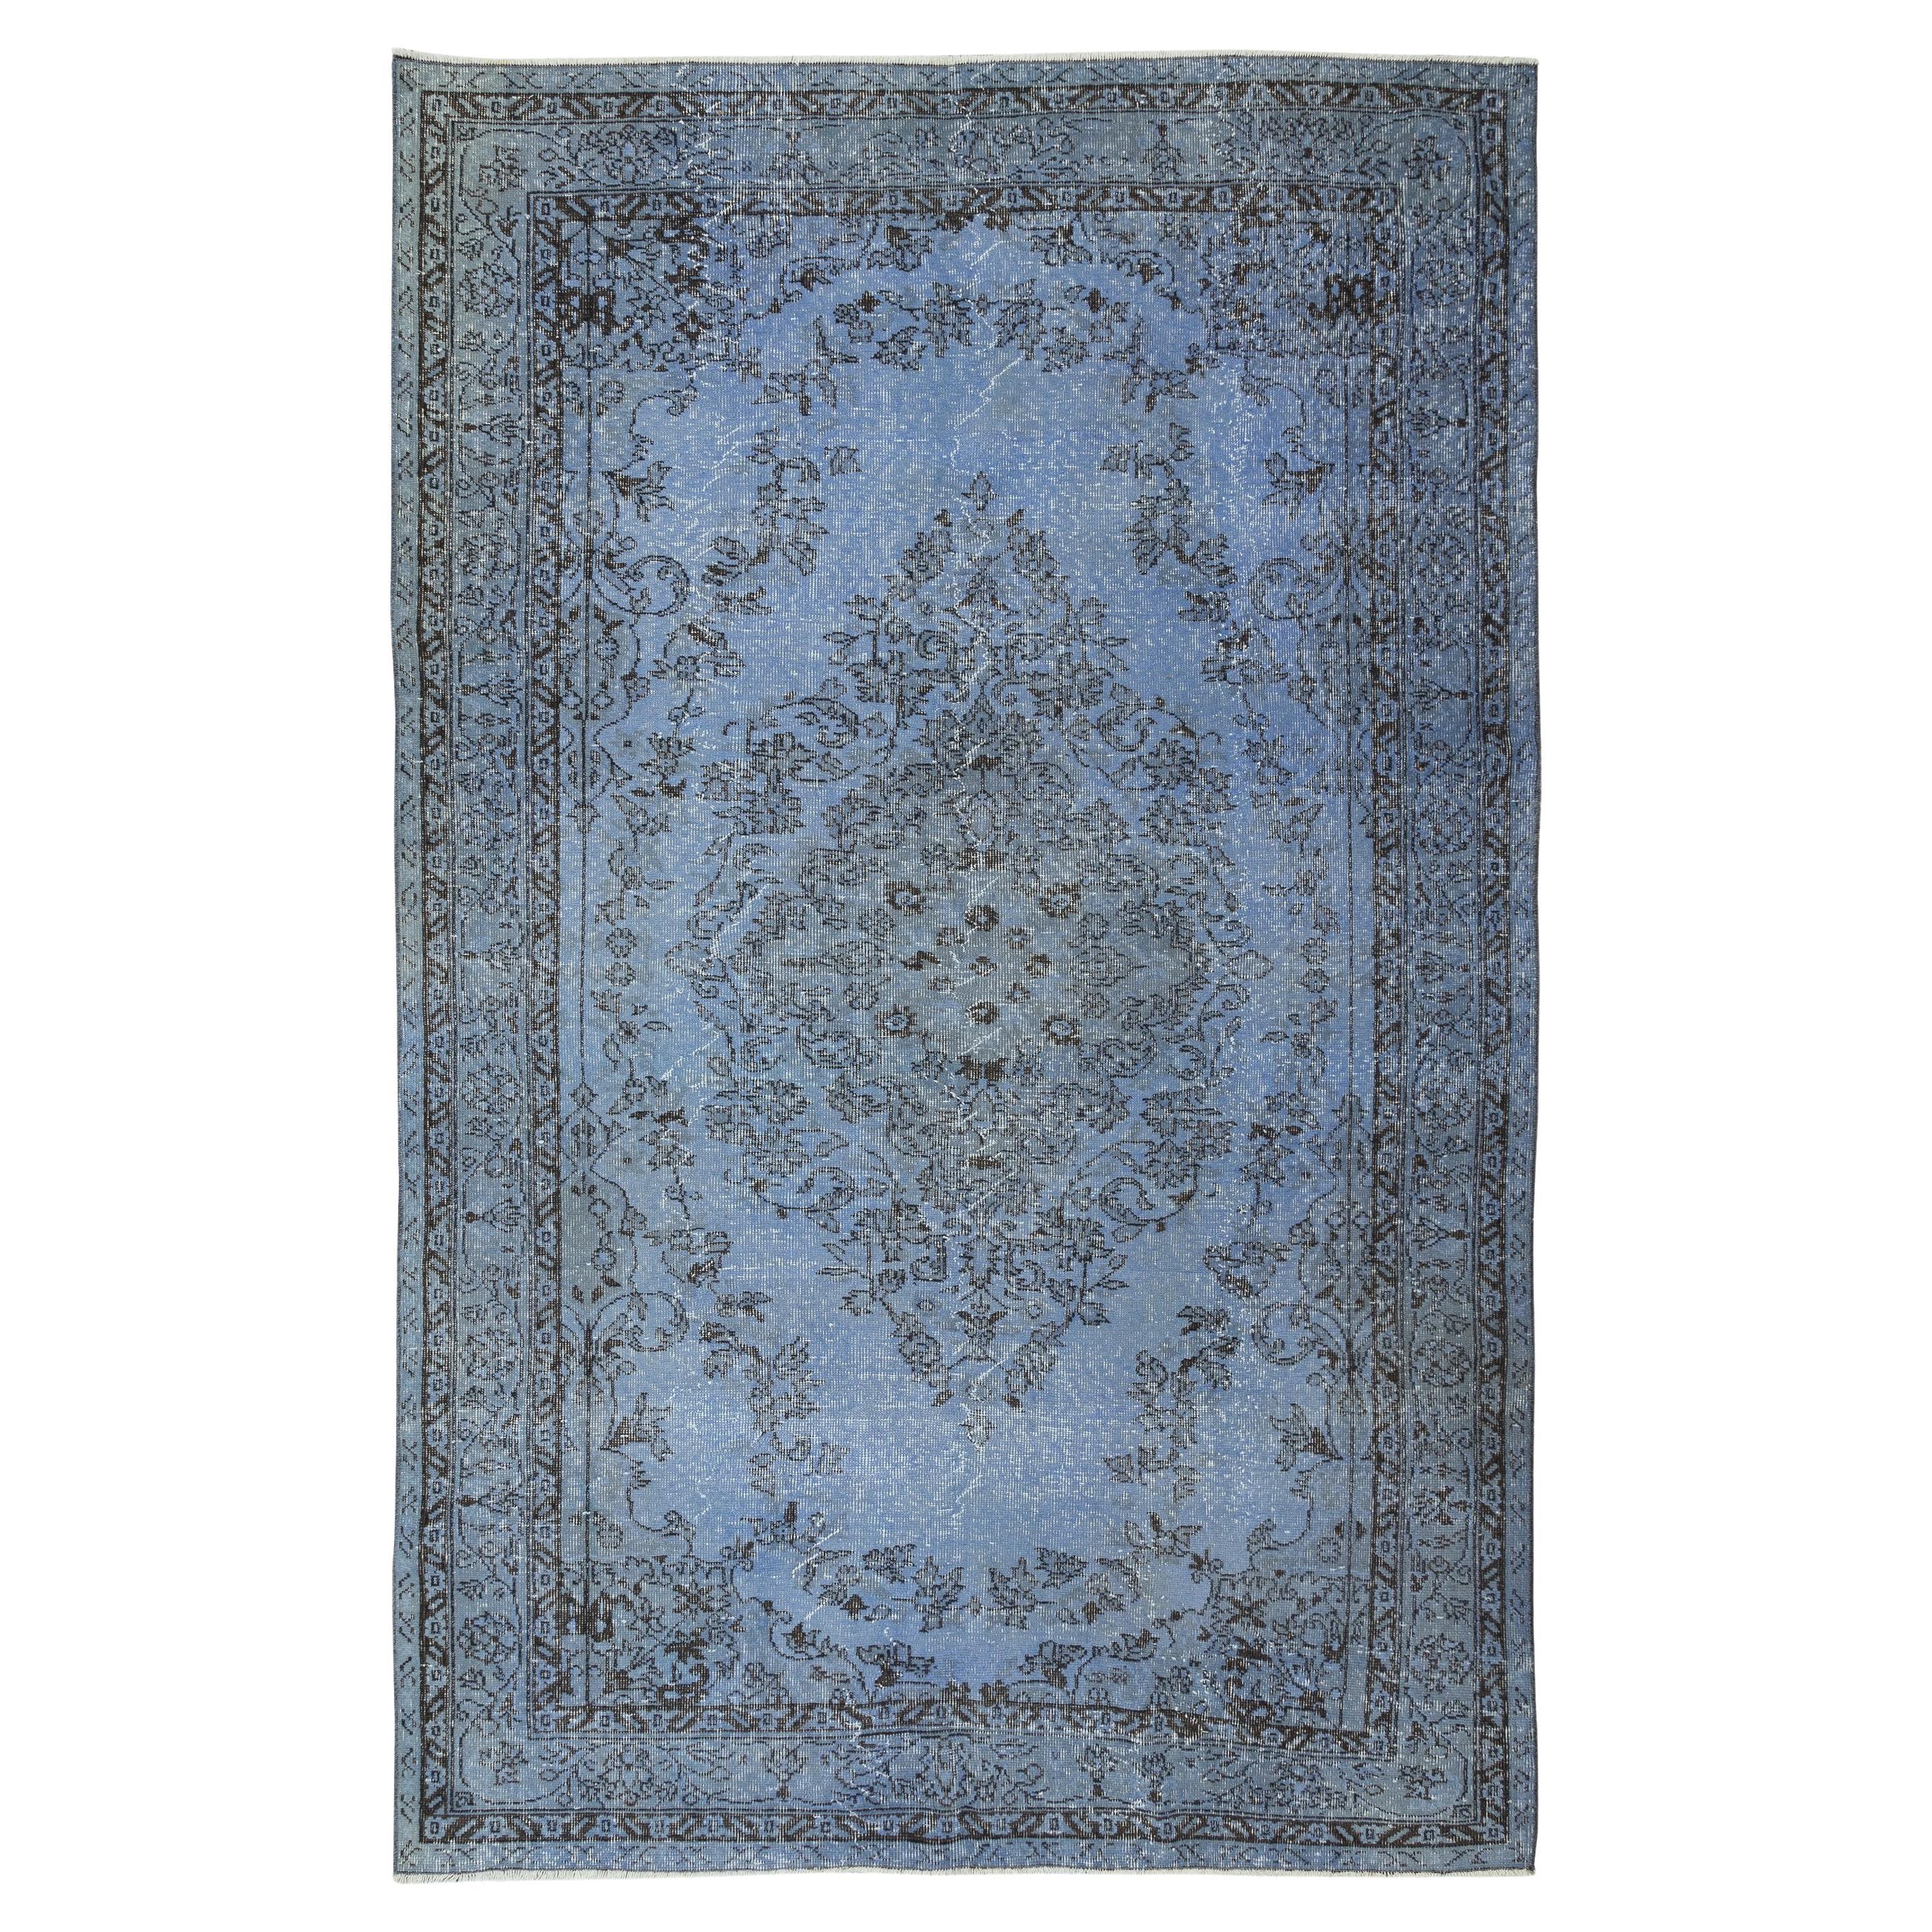 6x9.6 Ft Vintage Handmade Turkish Area Rug Over-Dyed in Blue 4 Modern Interiors